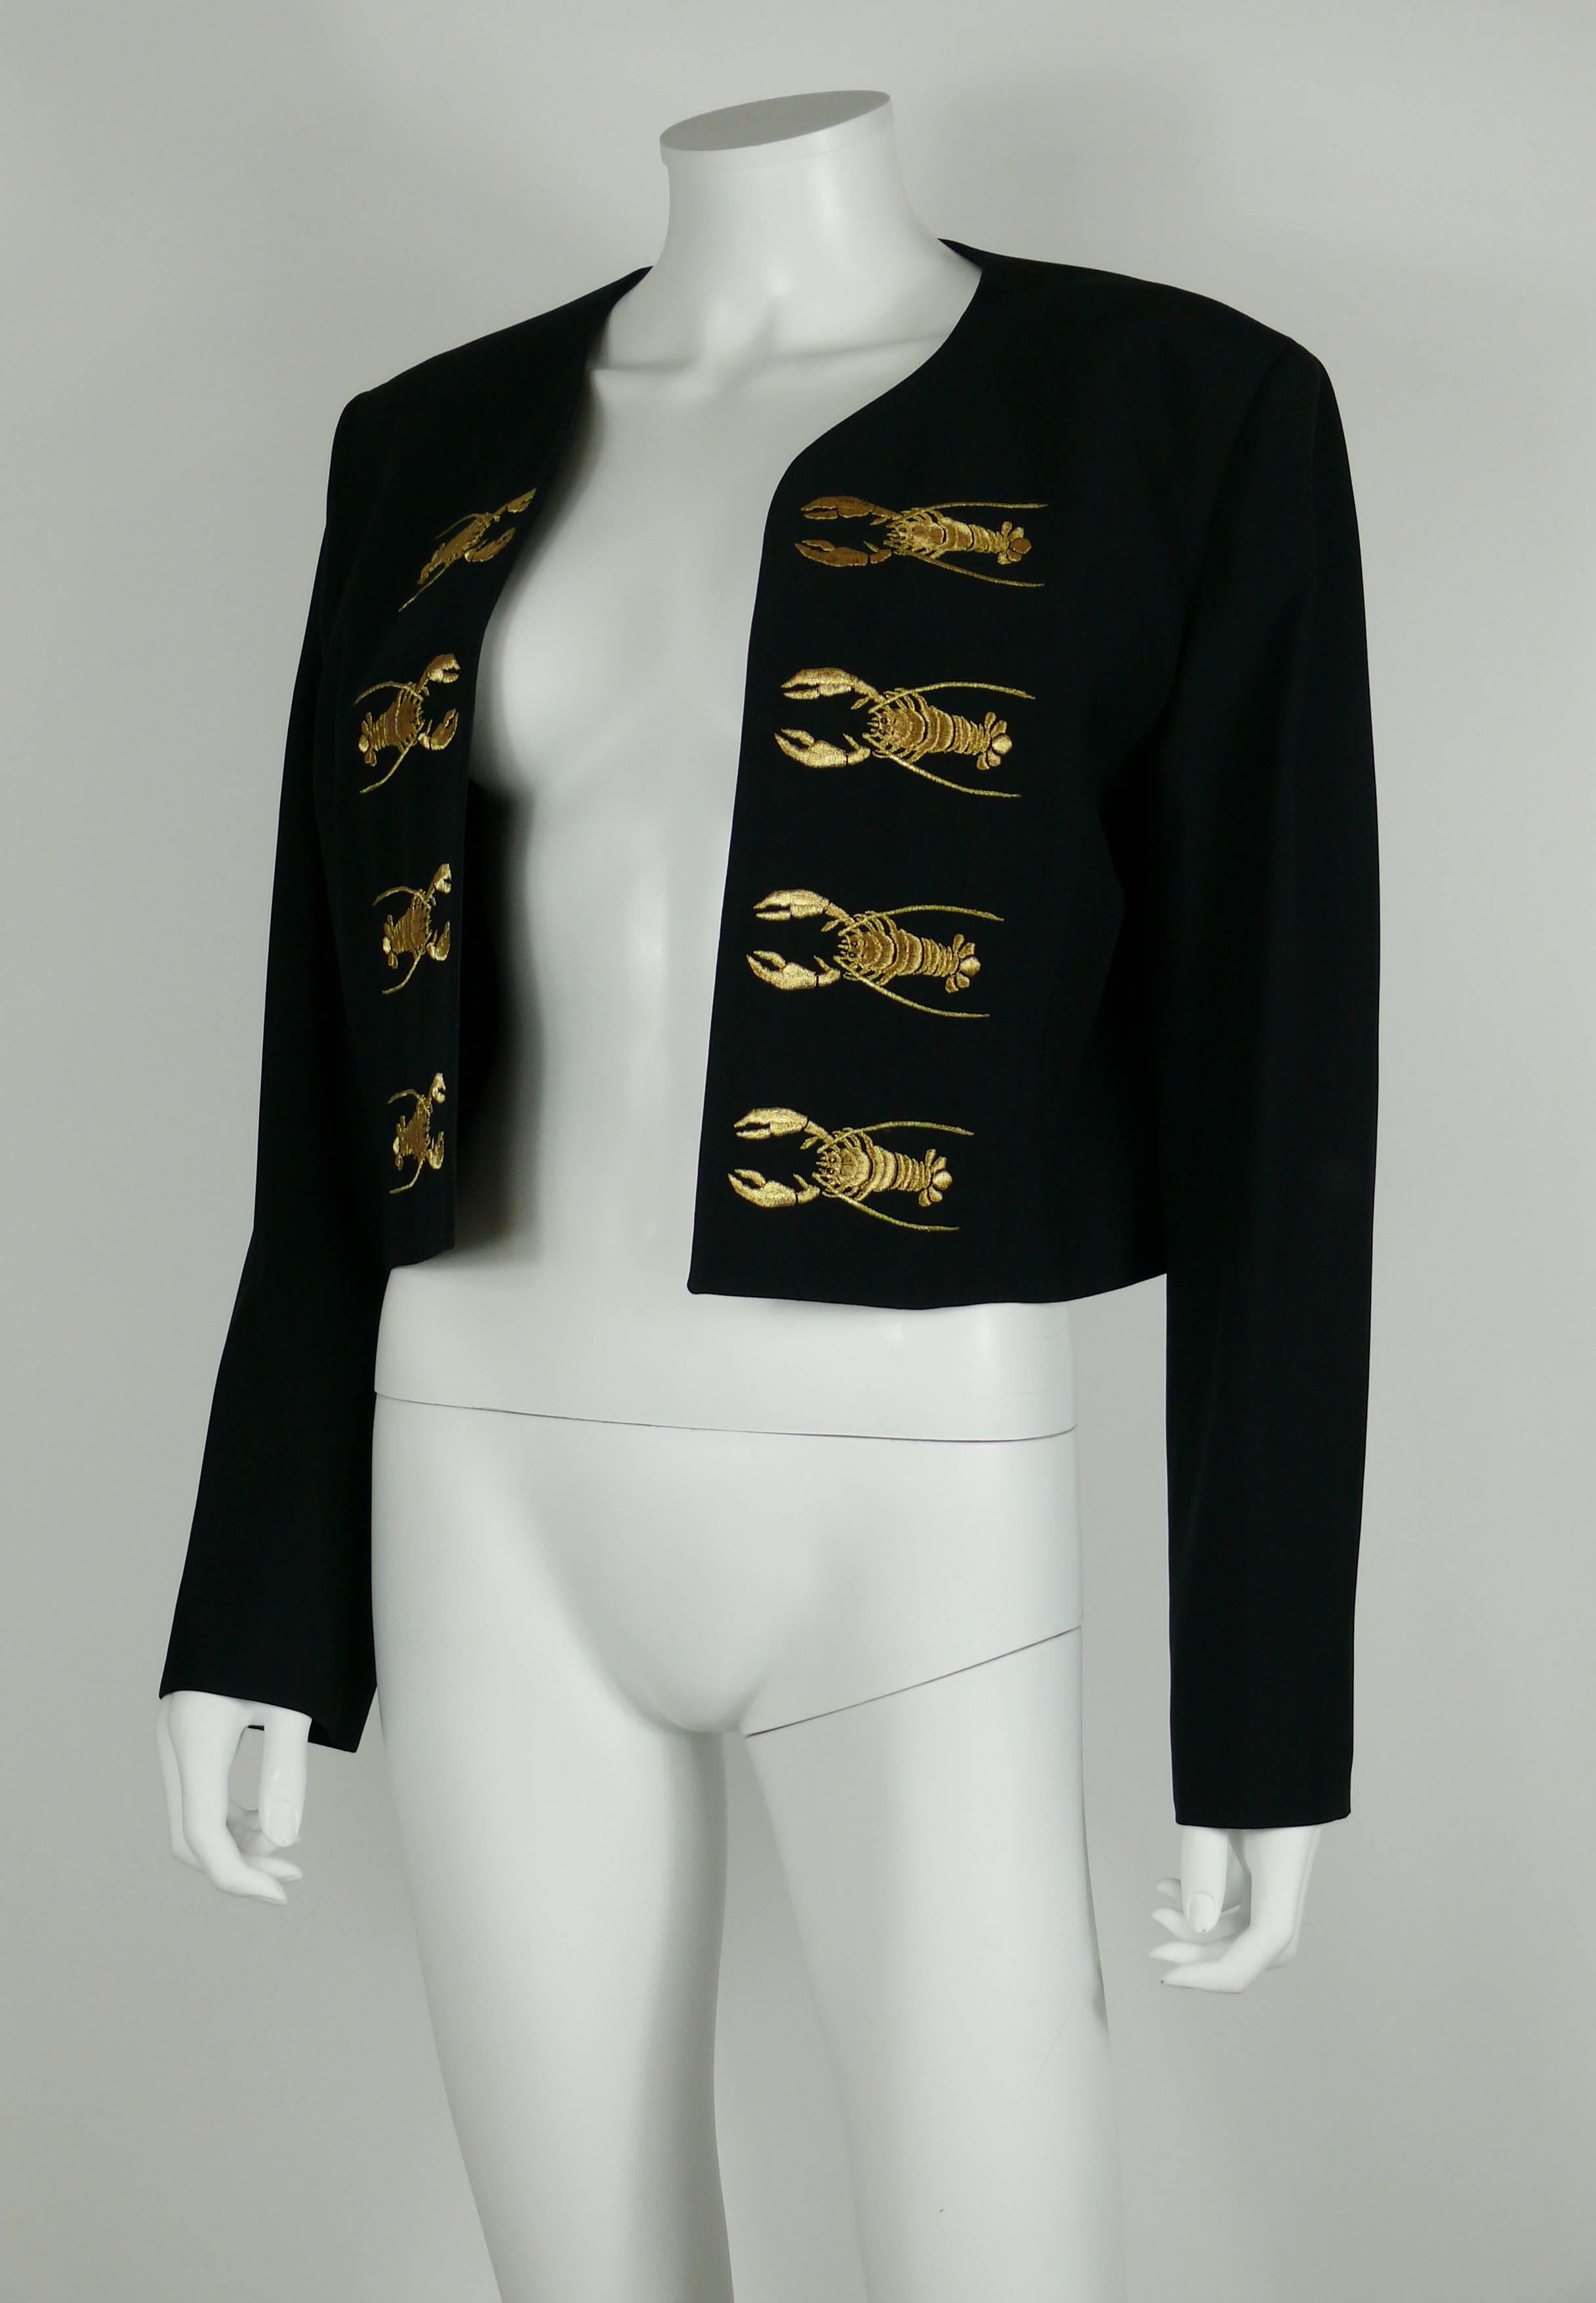 MOSCHINO Couture vintage rare 1989 iconic black blazer featuring gold embroidered lobsters.

No buttoning.
Fully lined.

Label reads MOSCHINO Couture Made in Italy CRUISE ME BABY.

Size label reads : I 46 / D 42 / F 42 / GB 14 / USA 12.
Please